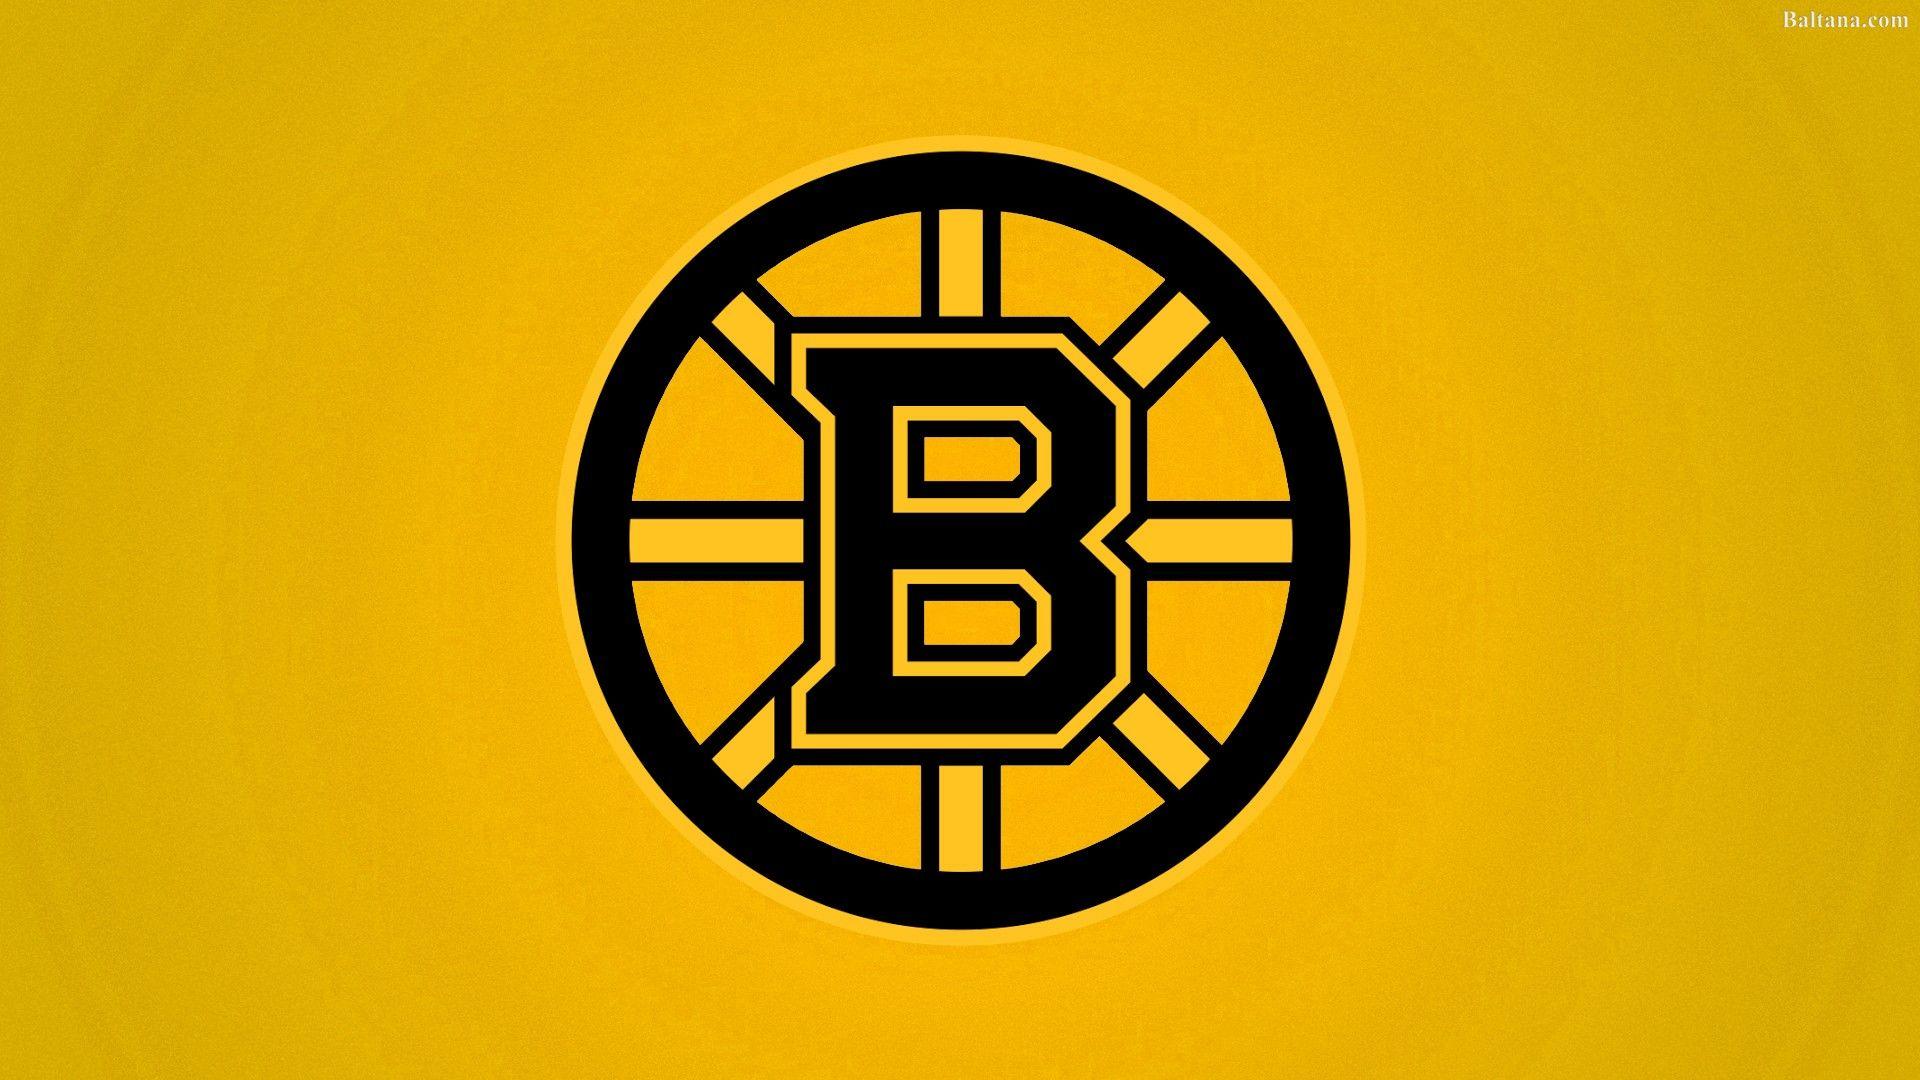 Boston Bruins HD Wallpapers - Top Free Boston Bruins HD Backgrounds ...